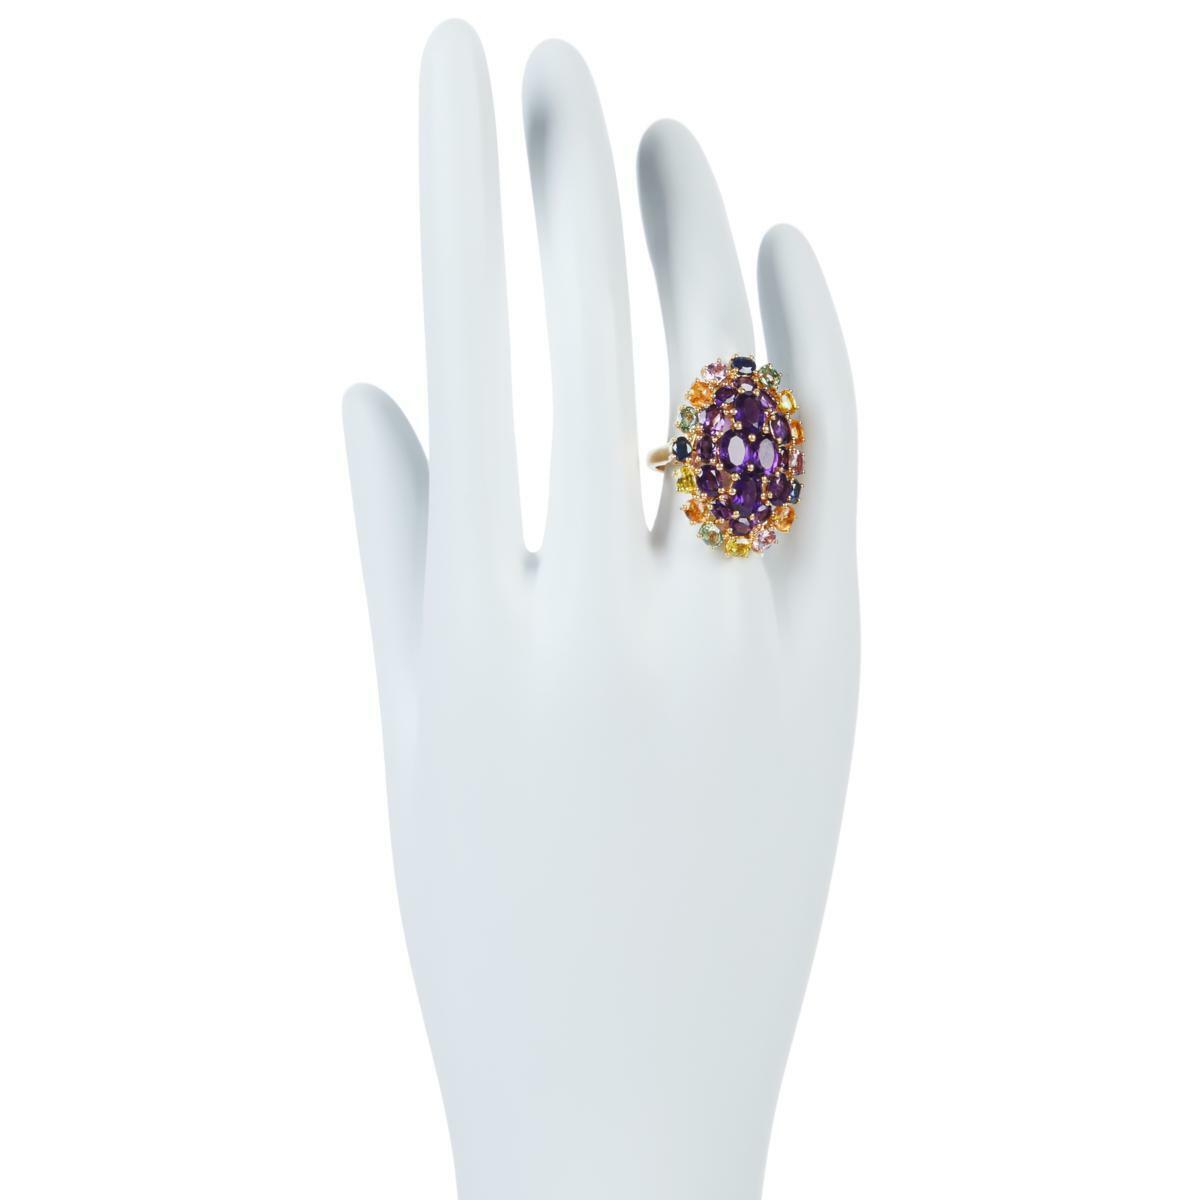 Colleen Lopez Gold-Plated Amethyst and Multi-Color Sapphire Ring, Size 6